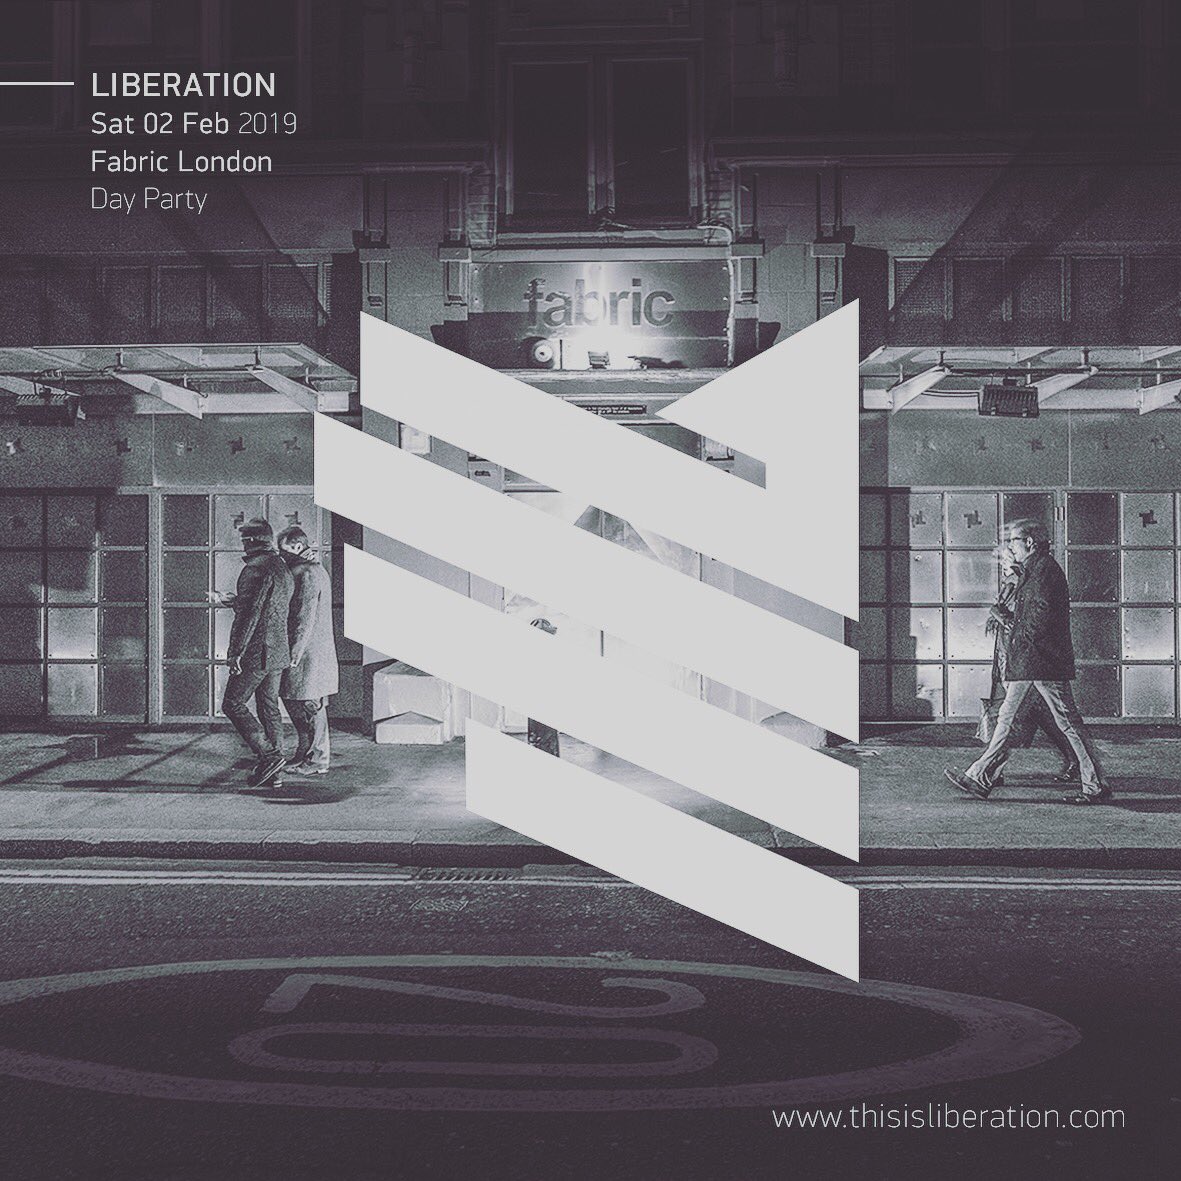 London 2nd Feb - Day Party! #liberation @fabriclondon #trance https://t.co/517CgkXs0q